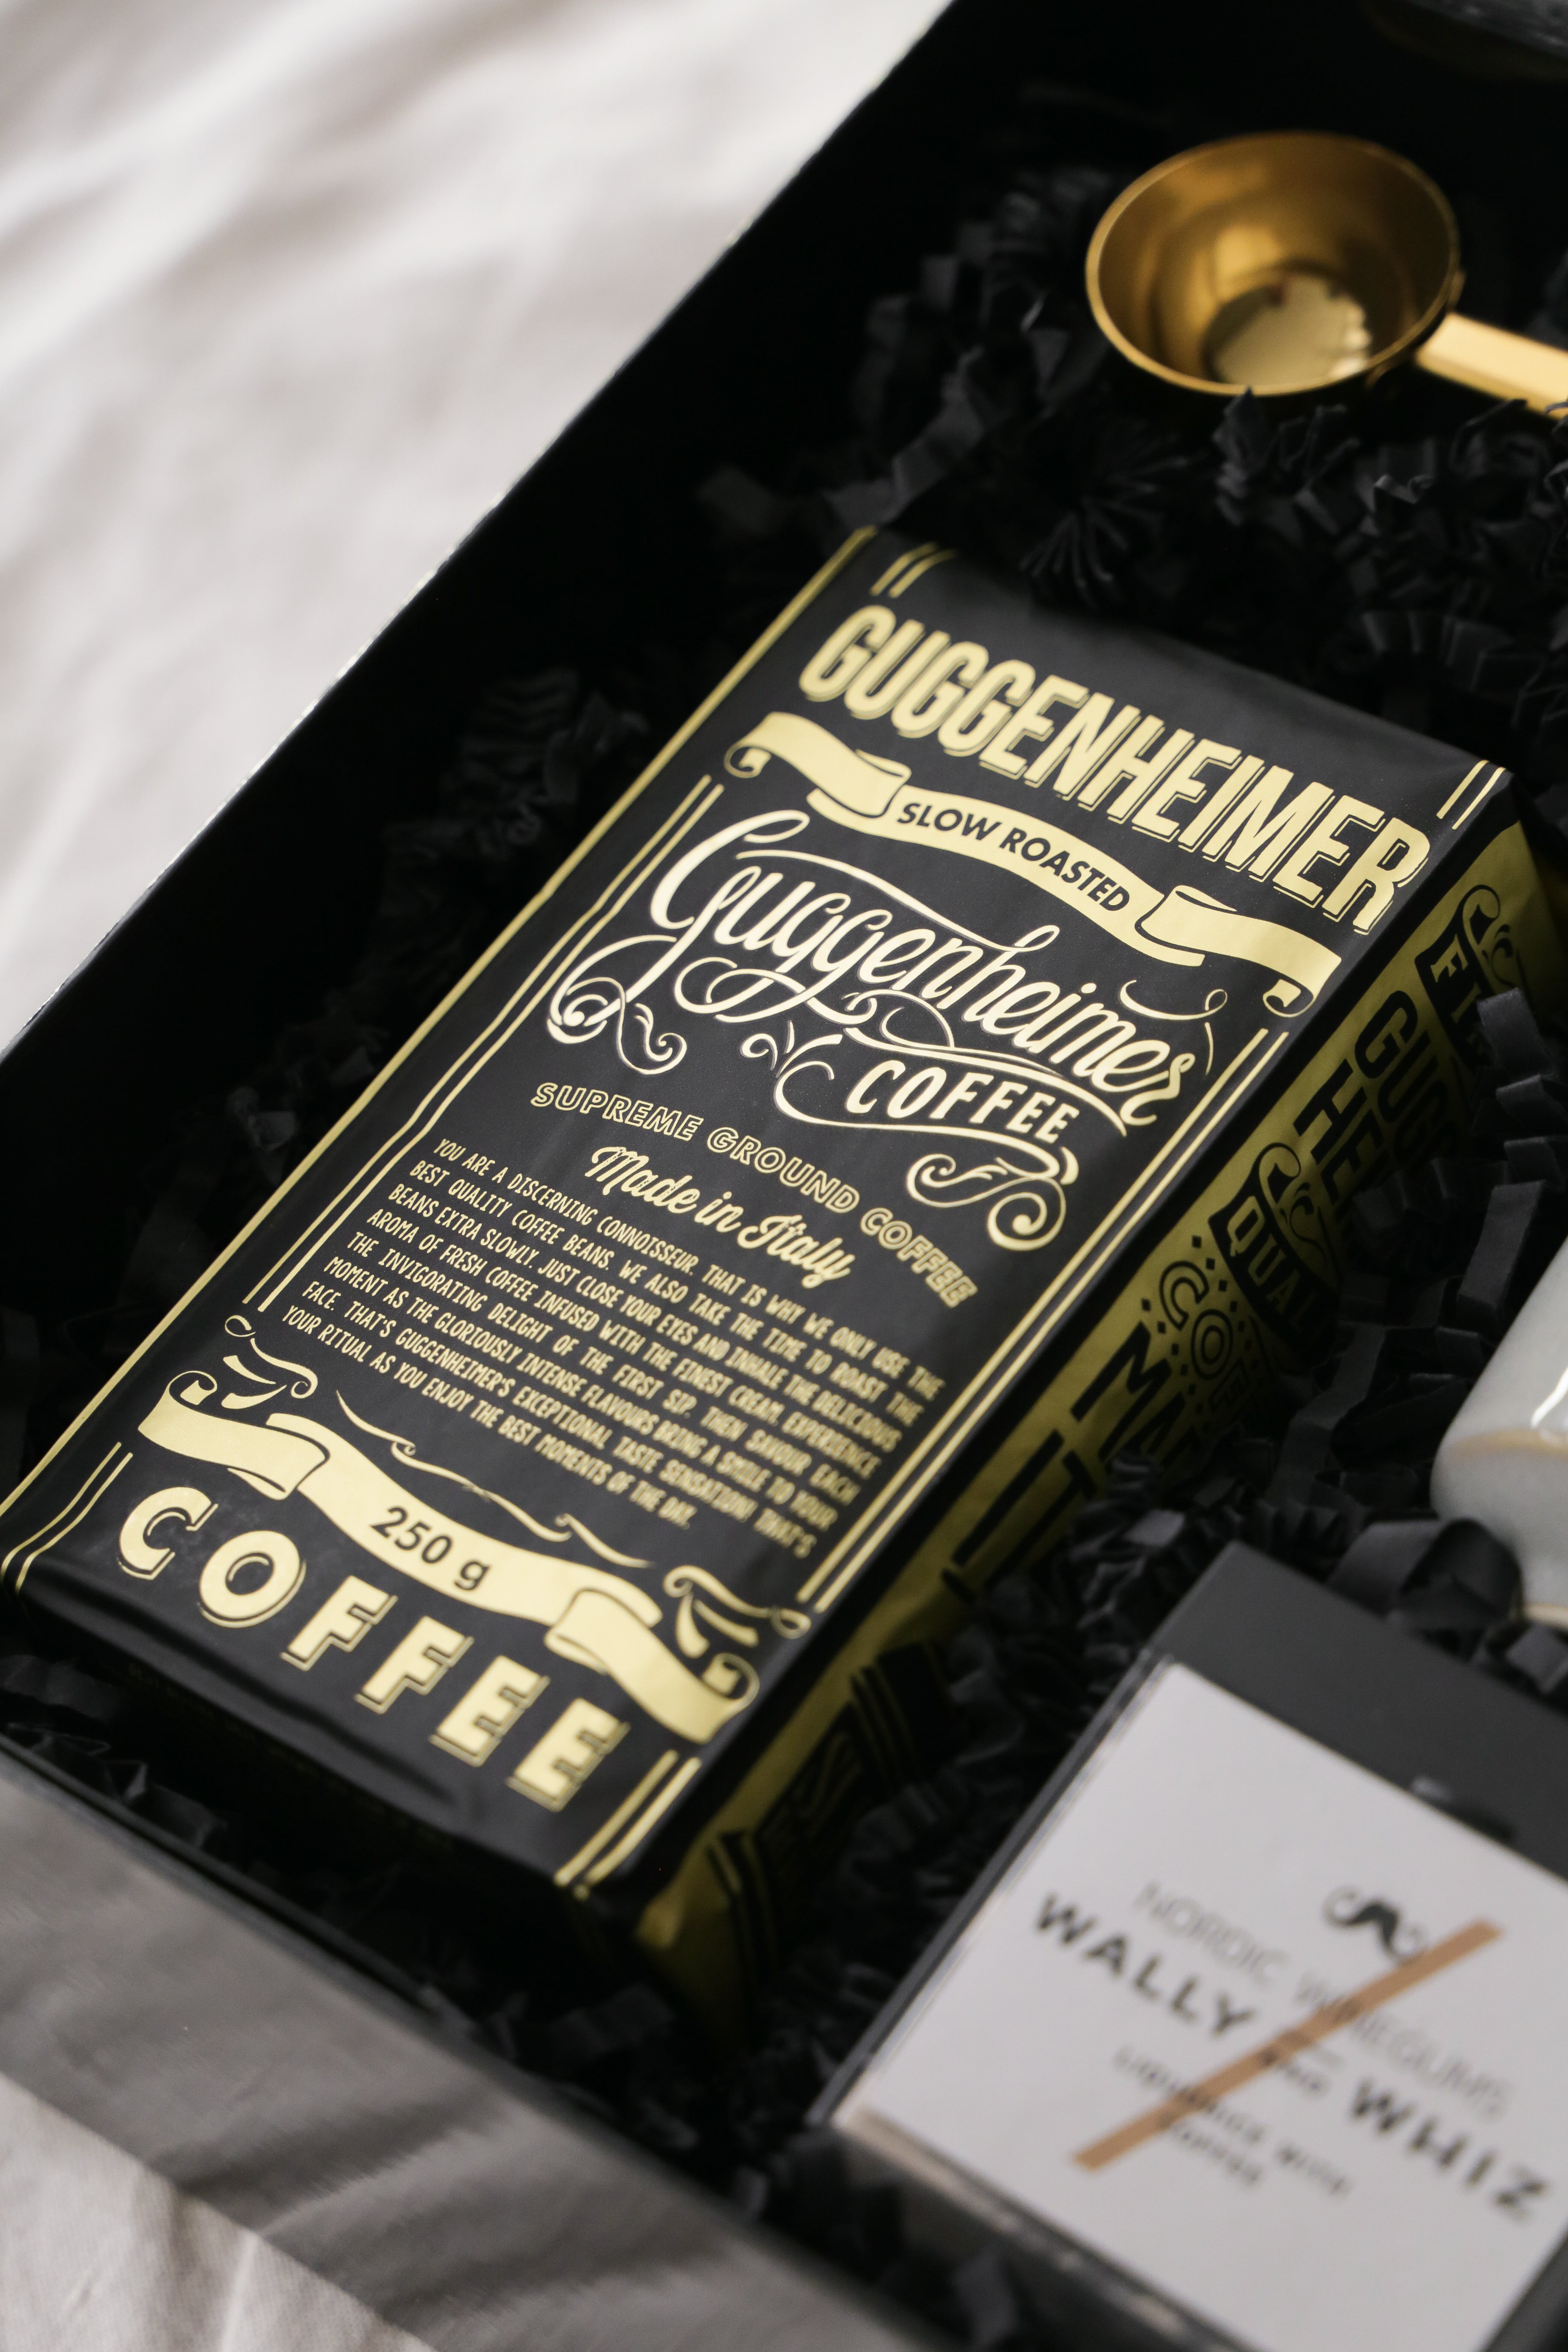 Gift Box - Coffee Deluxe